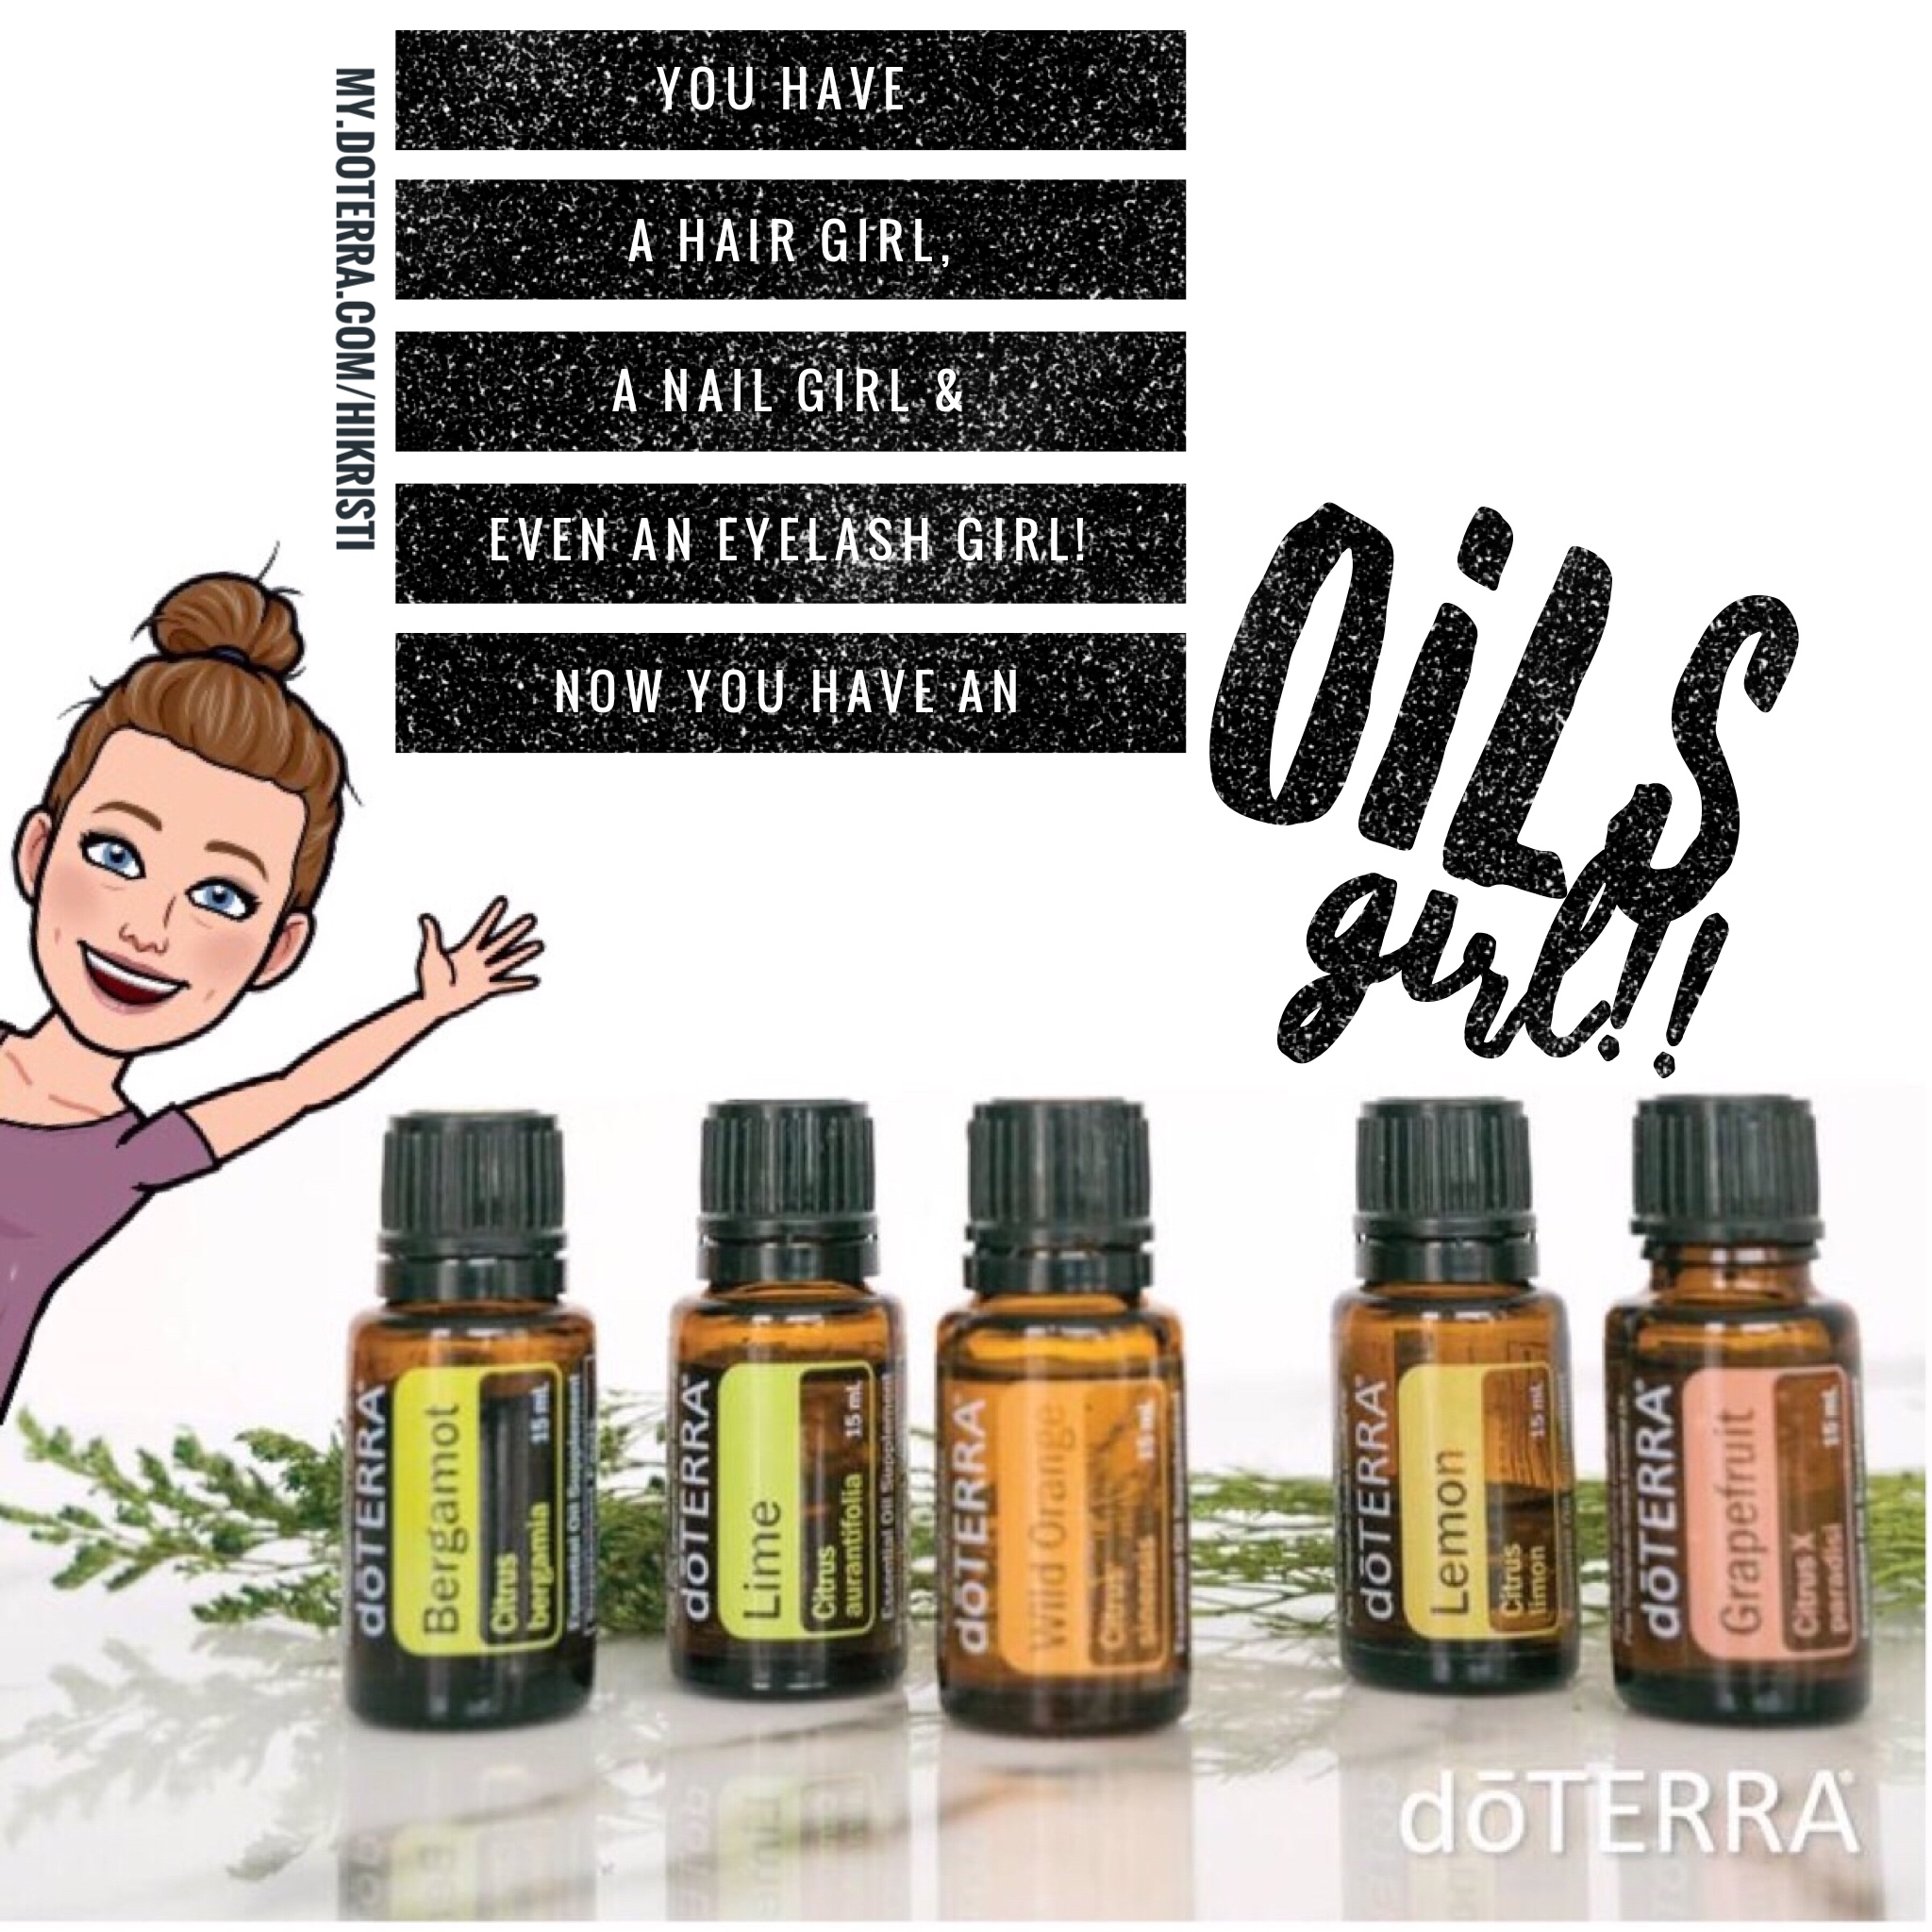 Essential Oils have changed my life! Let me introduce you! Let me be your oil girl!